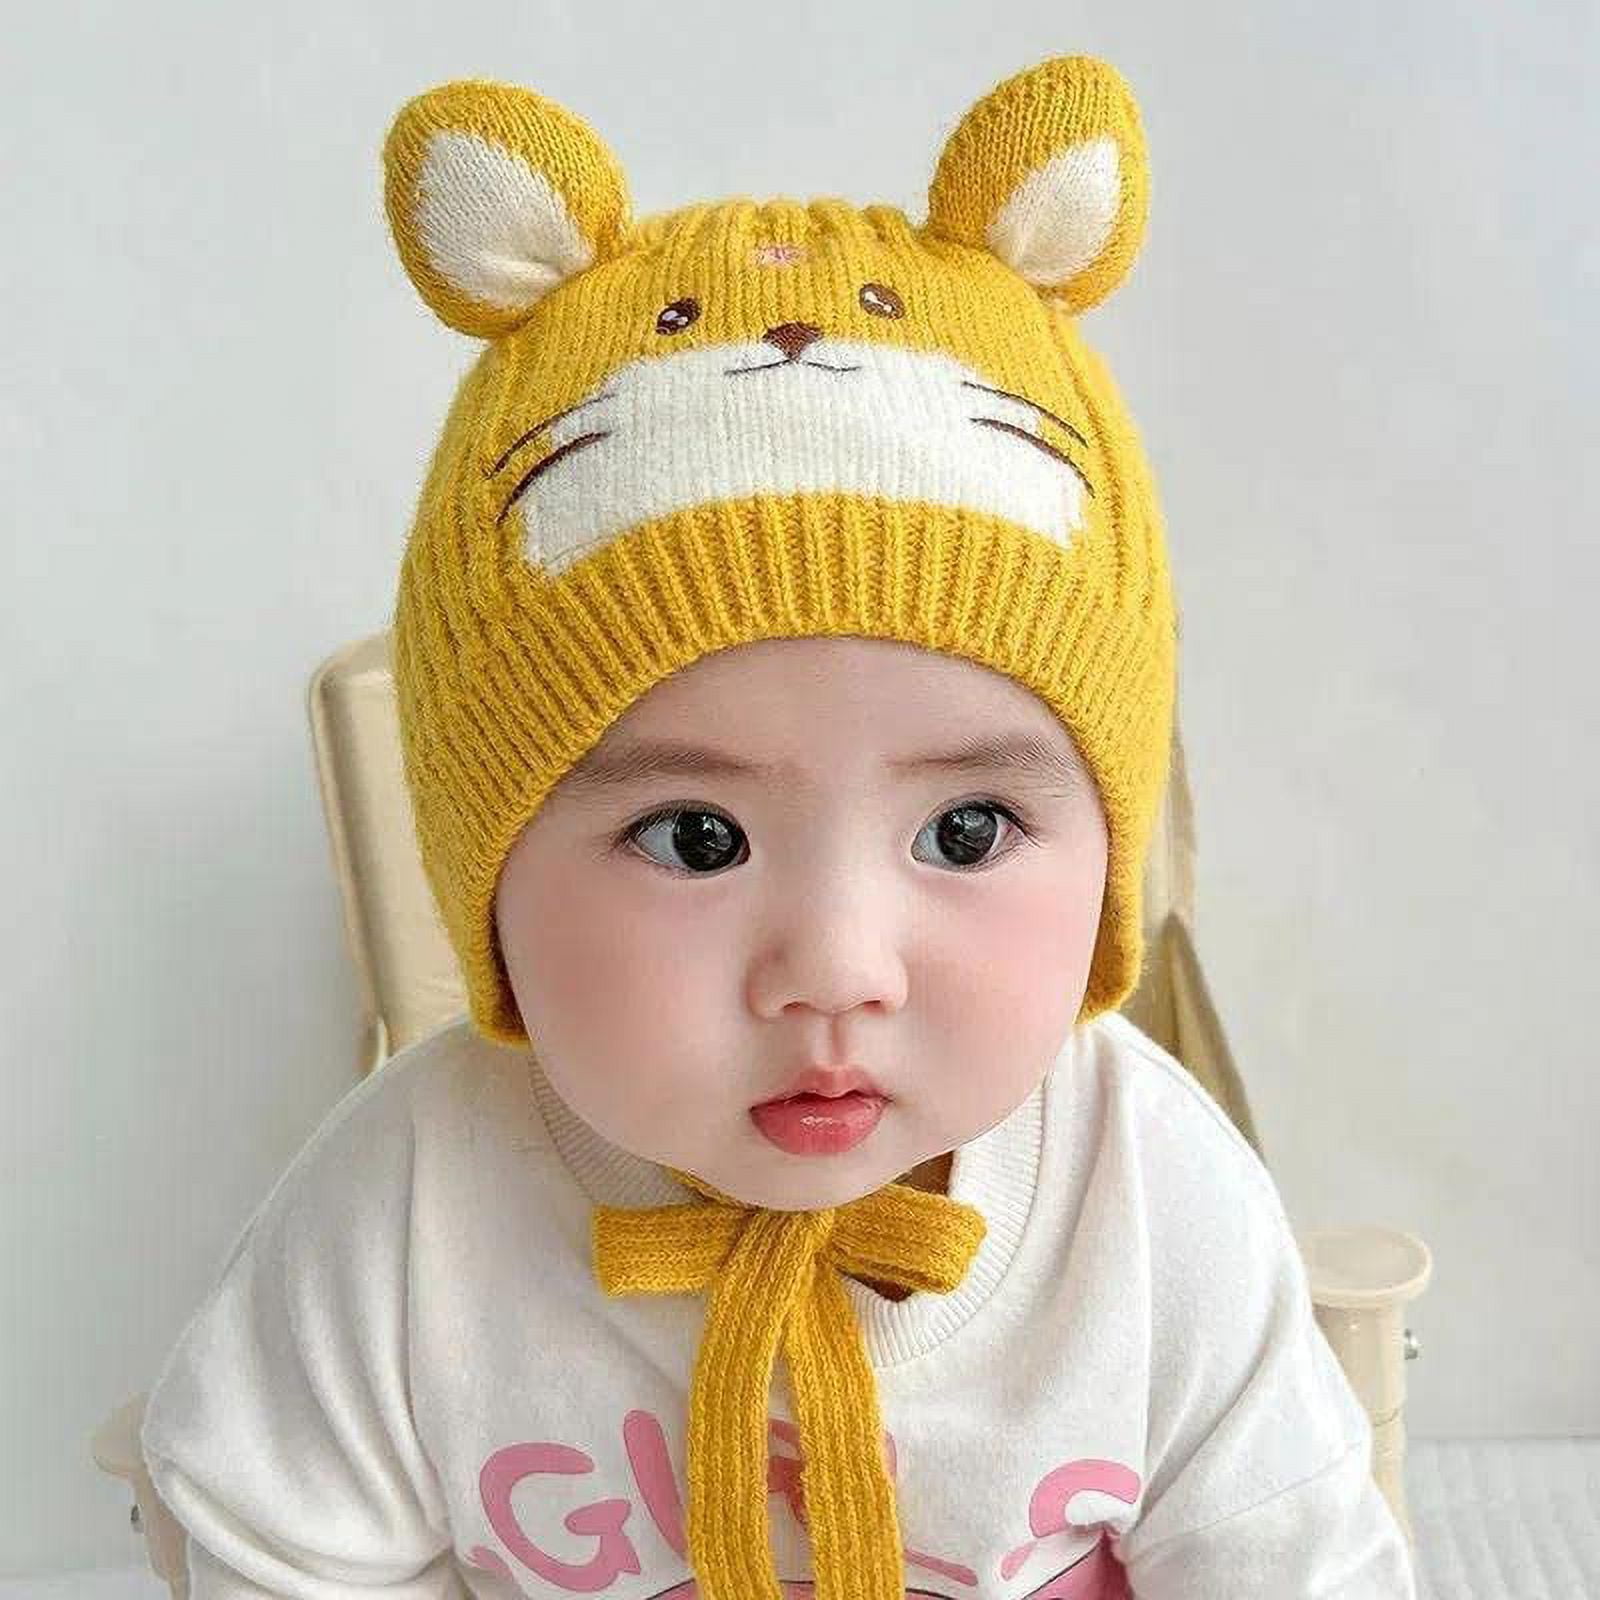 XYIYI Kids Soft Cheetah Knit Beanie Hat with Leopard Pattern and Fur Pom for Boys Girls